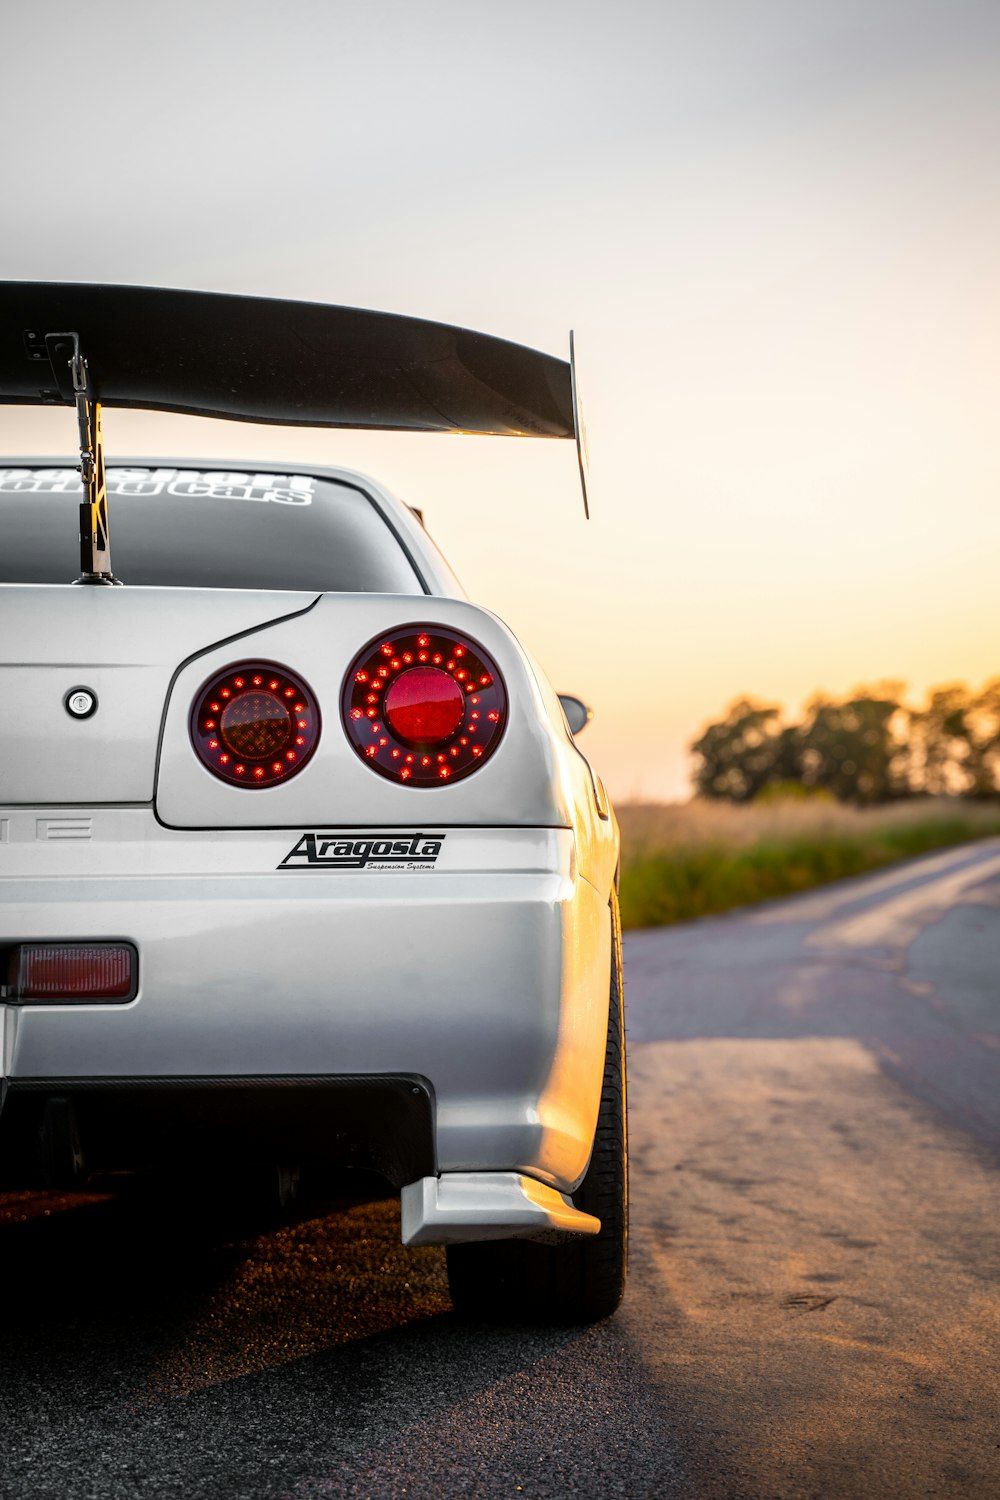 Nissan Skyline Picture. Download Free